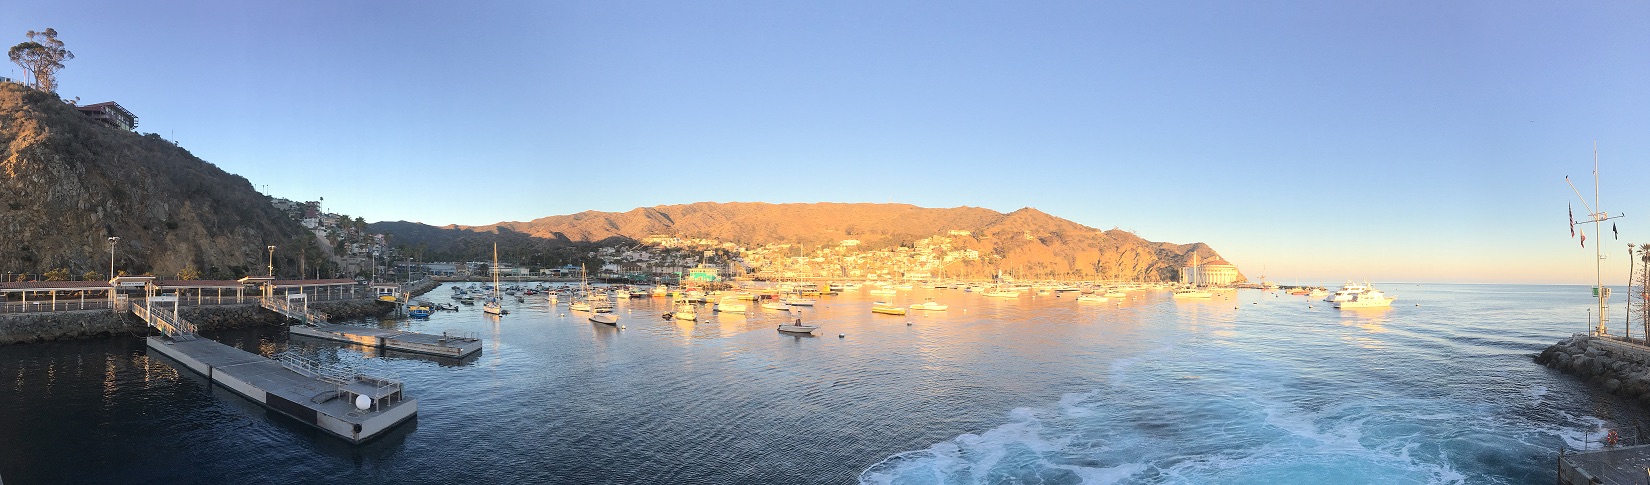 Avalon Harbor in early morning from the ferry